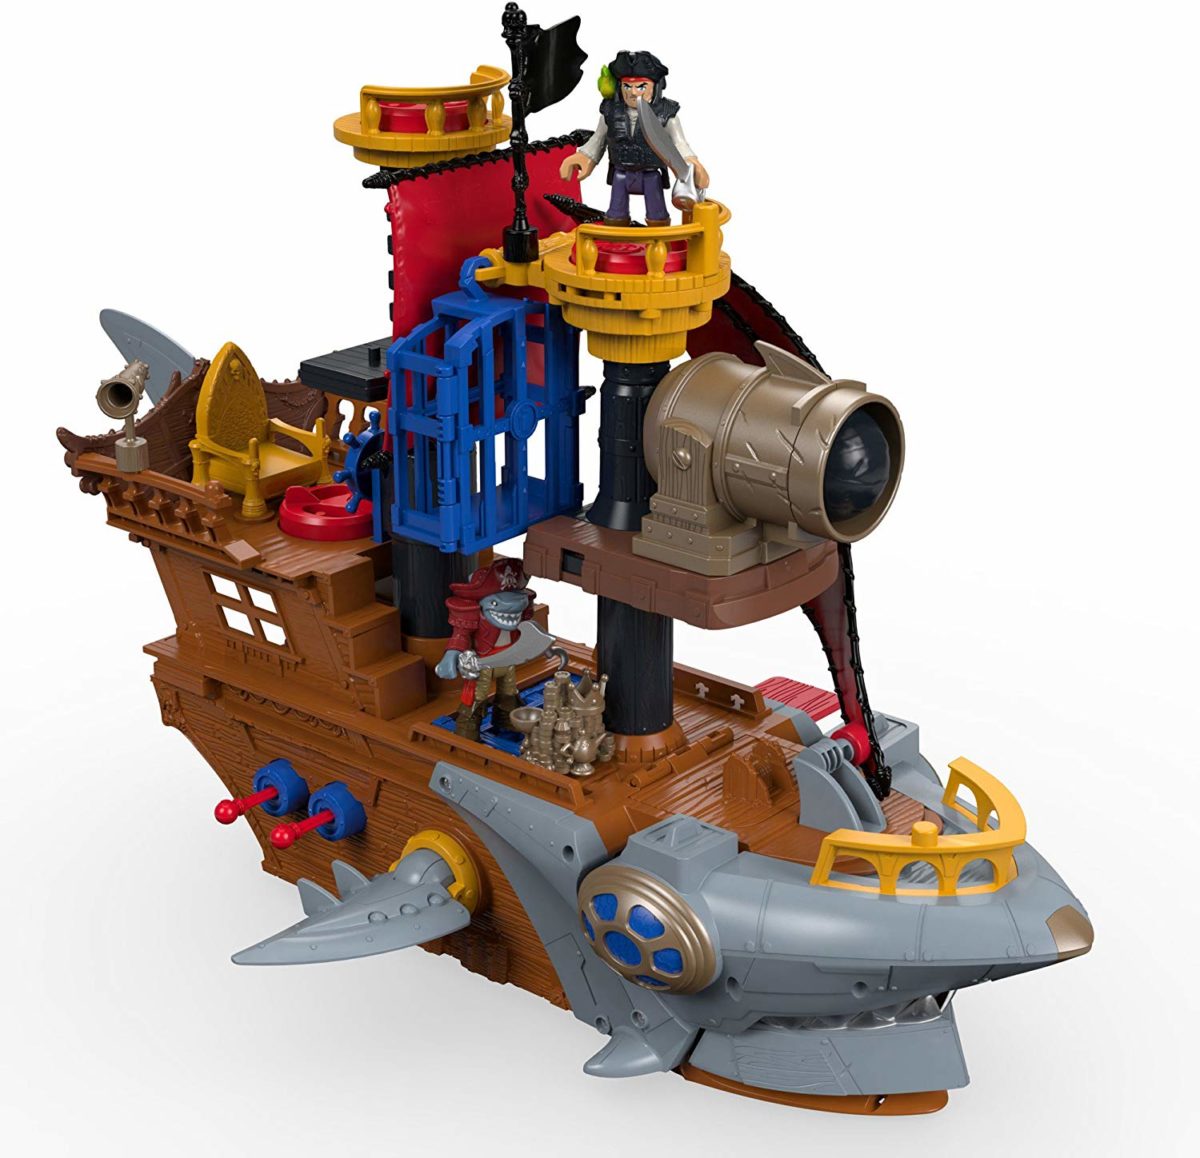 Fisher-Price Imaginext Shark-Bite Pirate Ship - Top Toys and Gifts for Four Year Old Boys 2